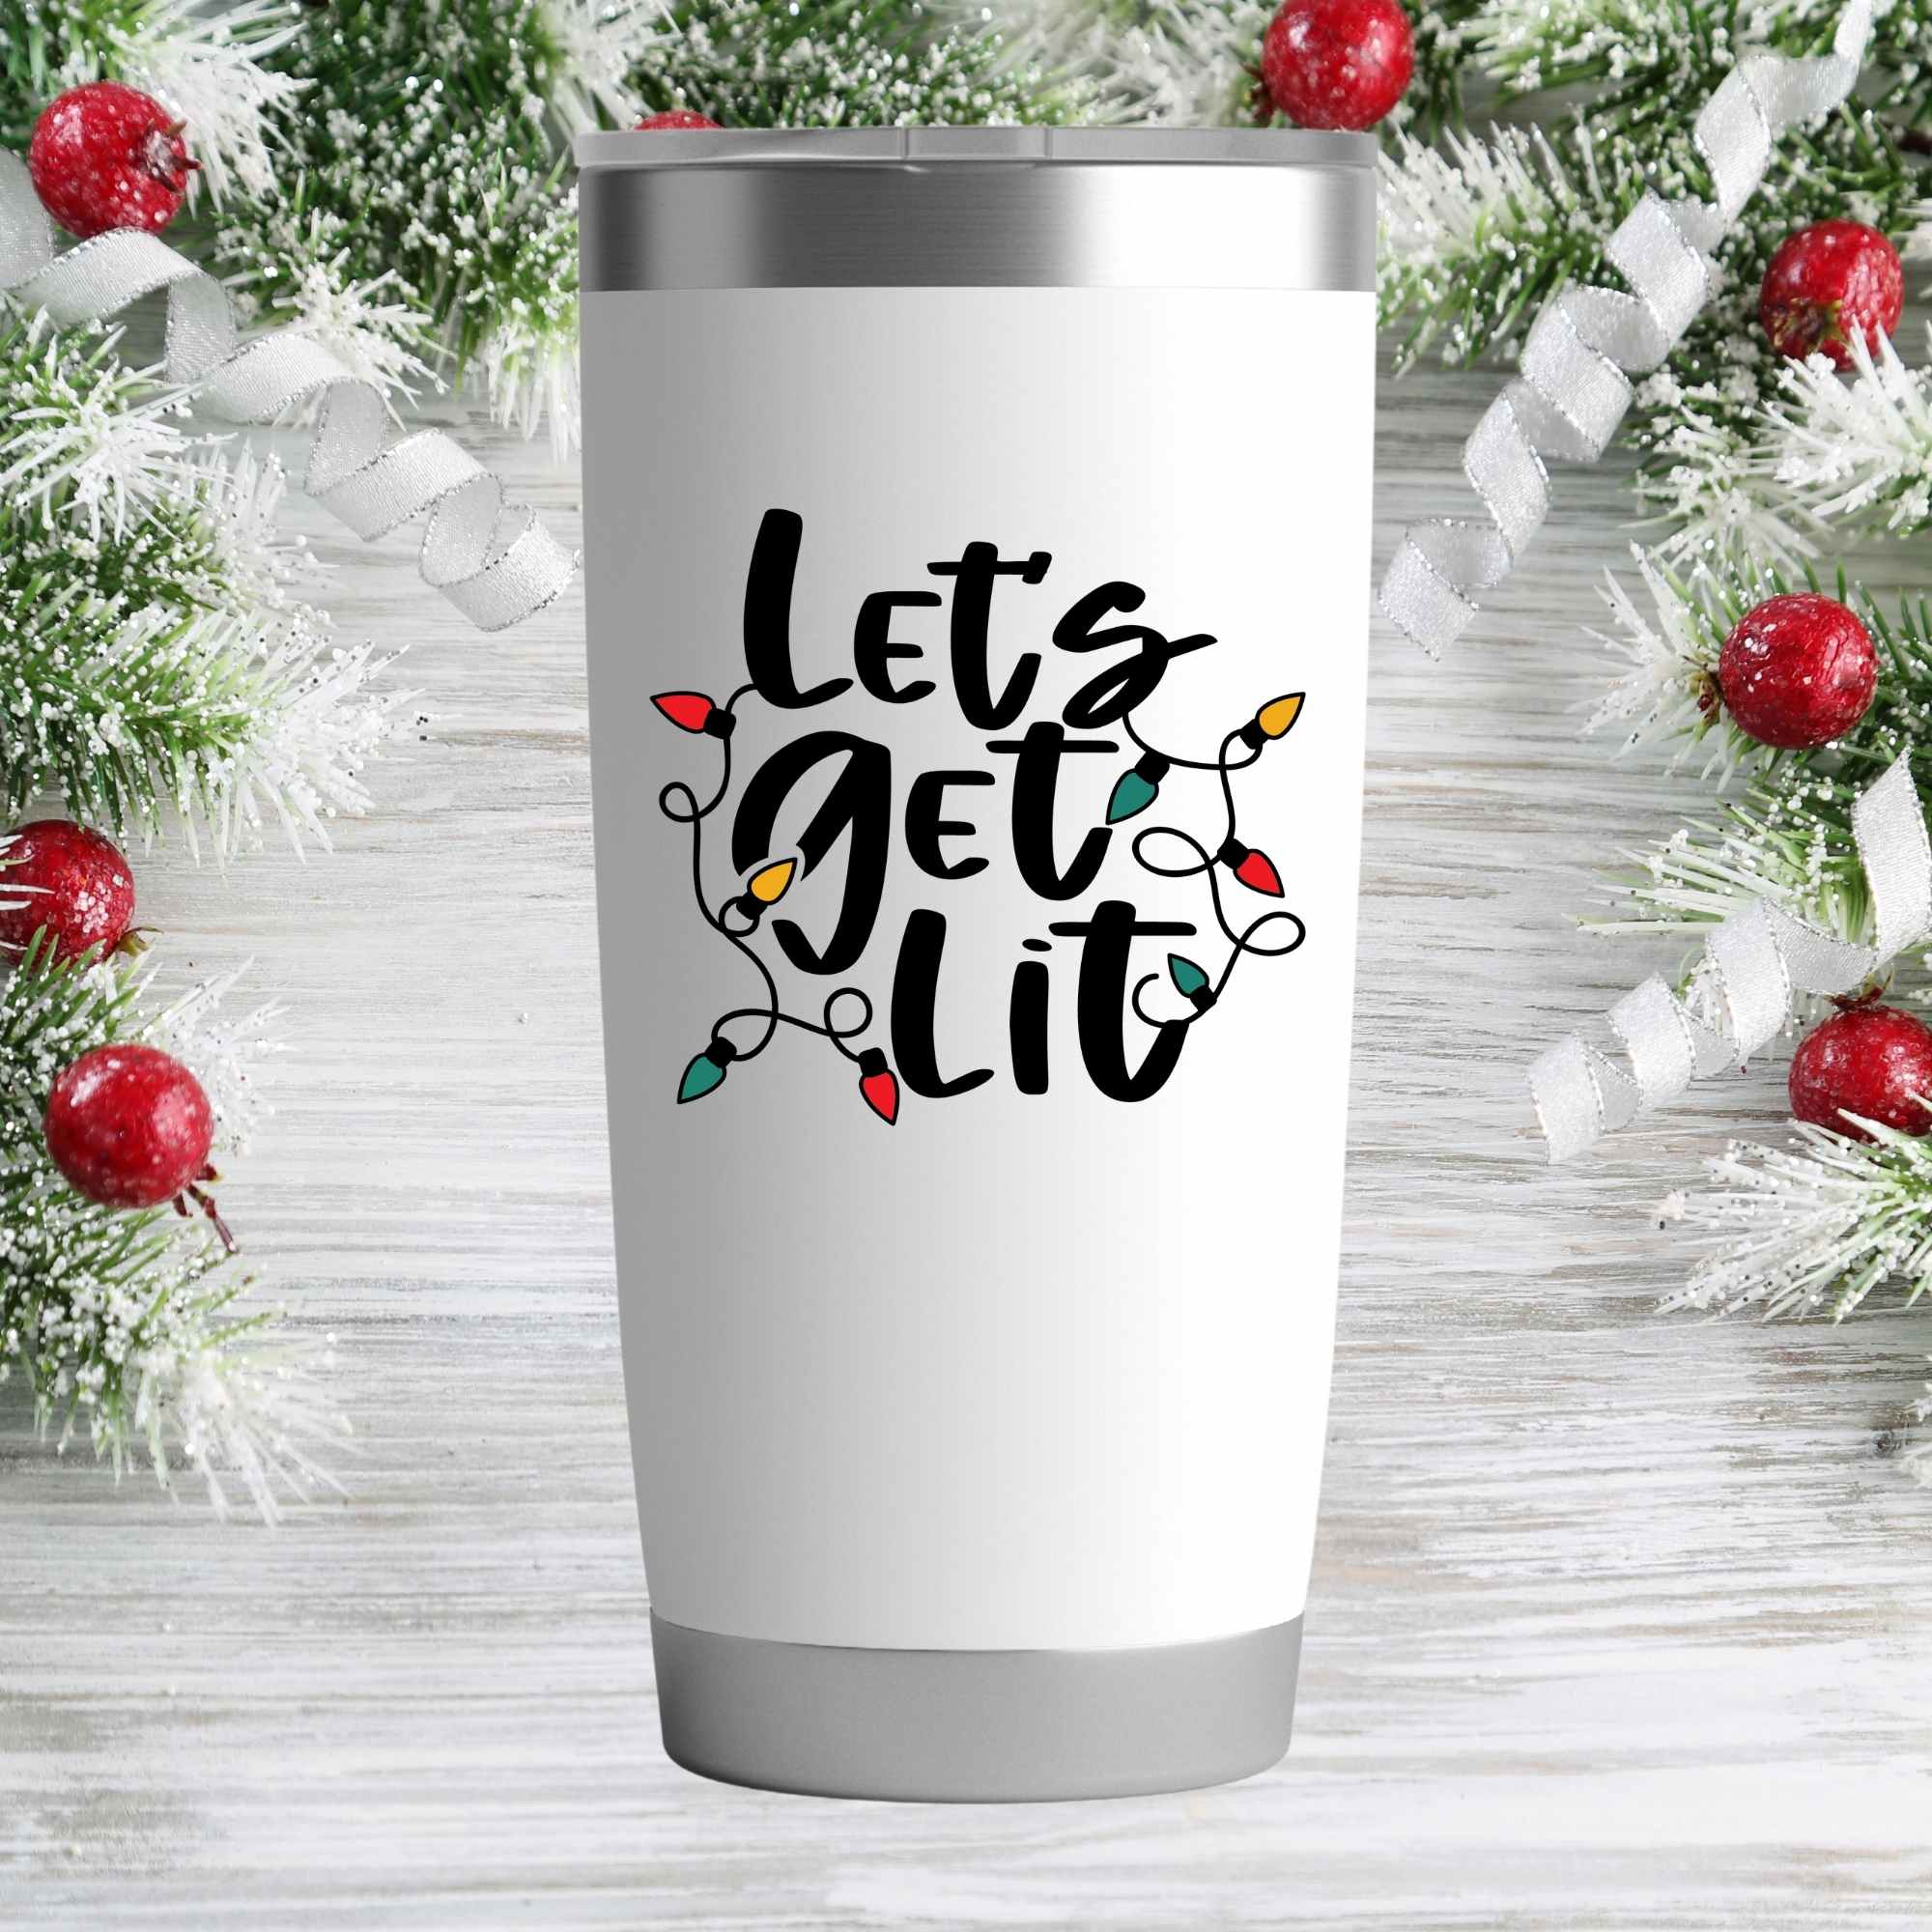 Let's get lit- 20oz Insulated Tumbler